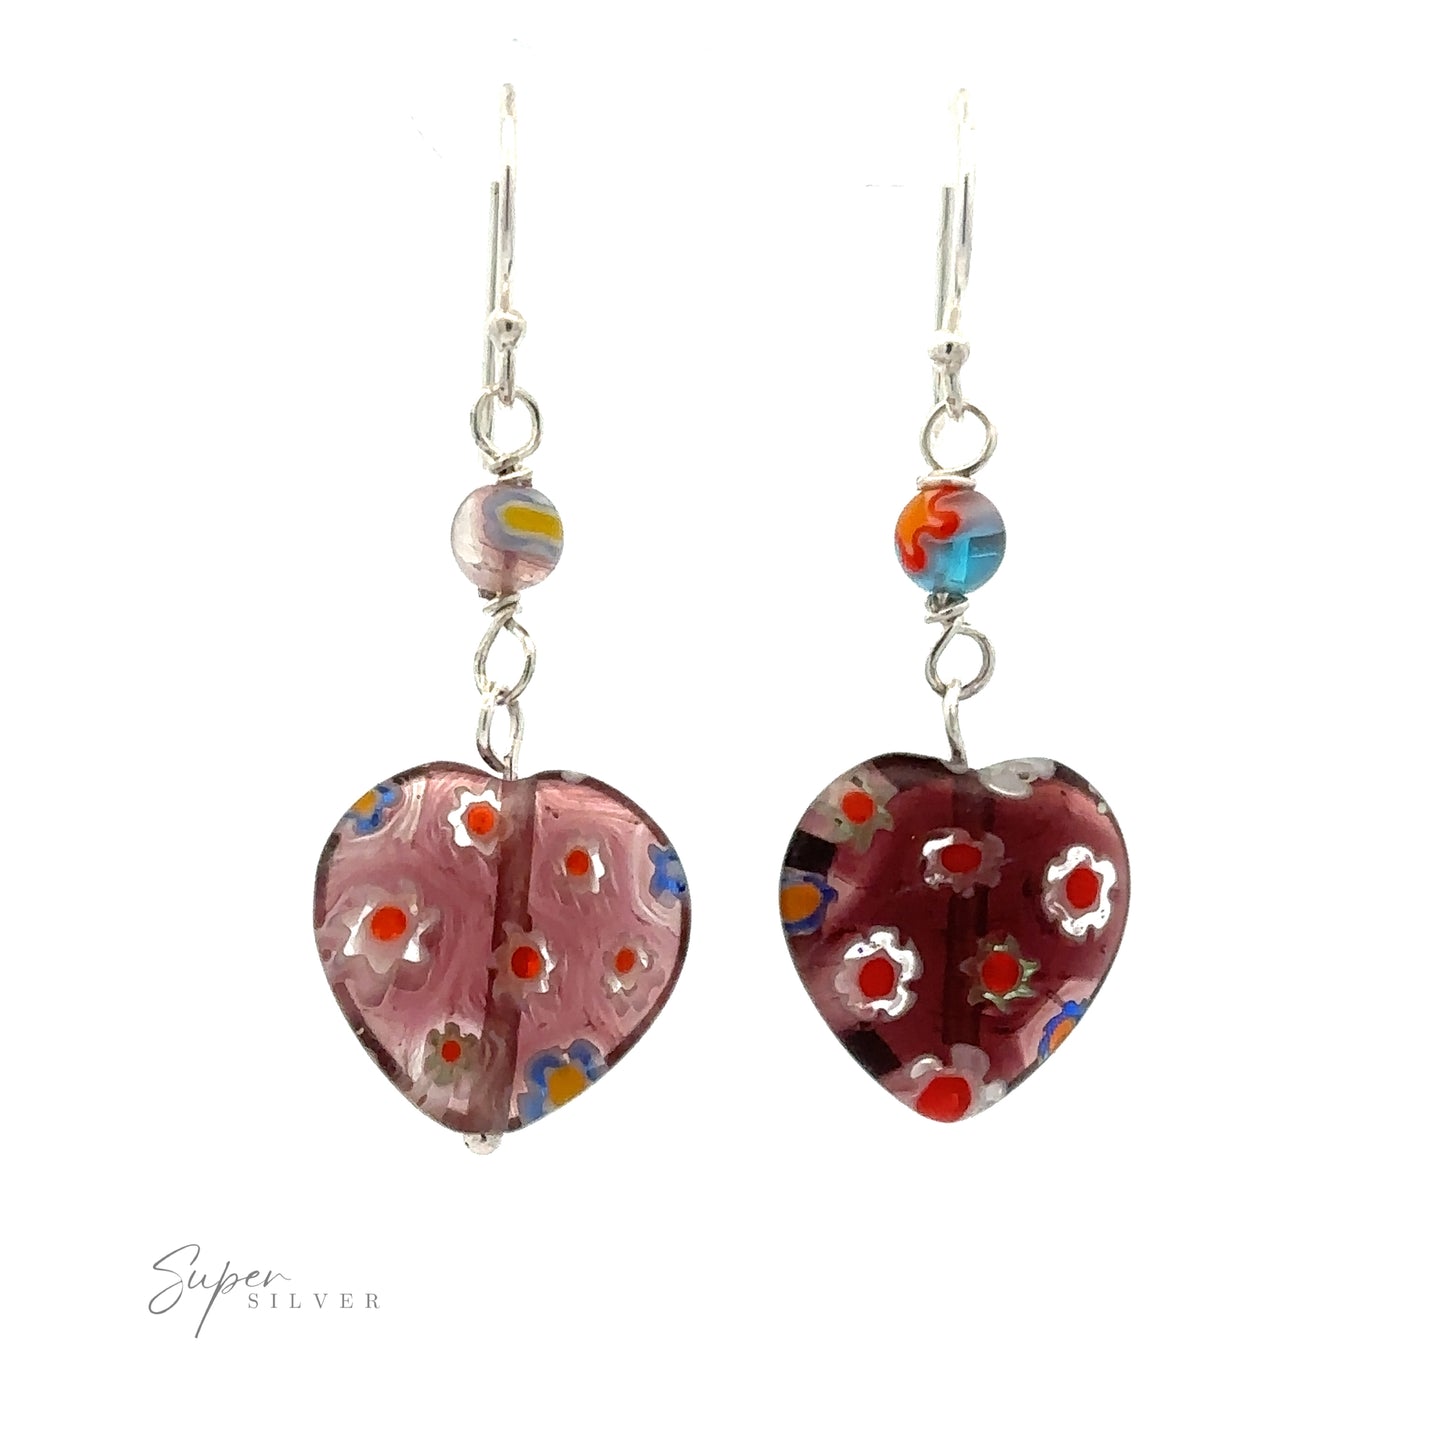 
                  
                    A pair of Beaded Resin Floral Heart Earrings with .925 Sterling Silver hooks, each featuring a heart-shaped glass pendant with multicolor flower detail. The left earring has a lighter pink heart, and the right a darker red one.
                  
                